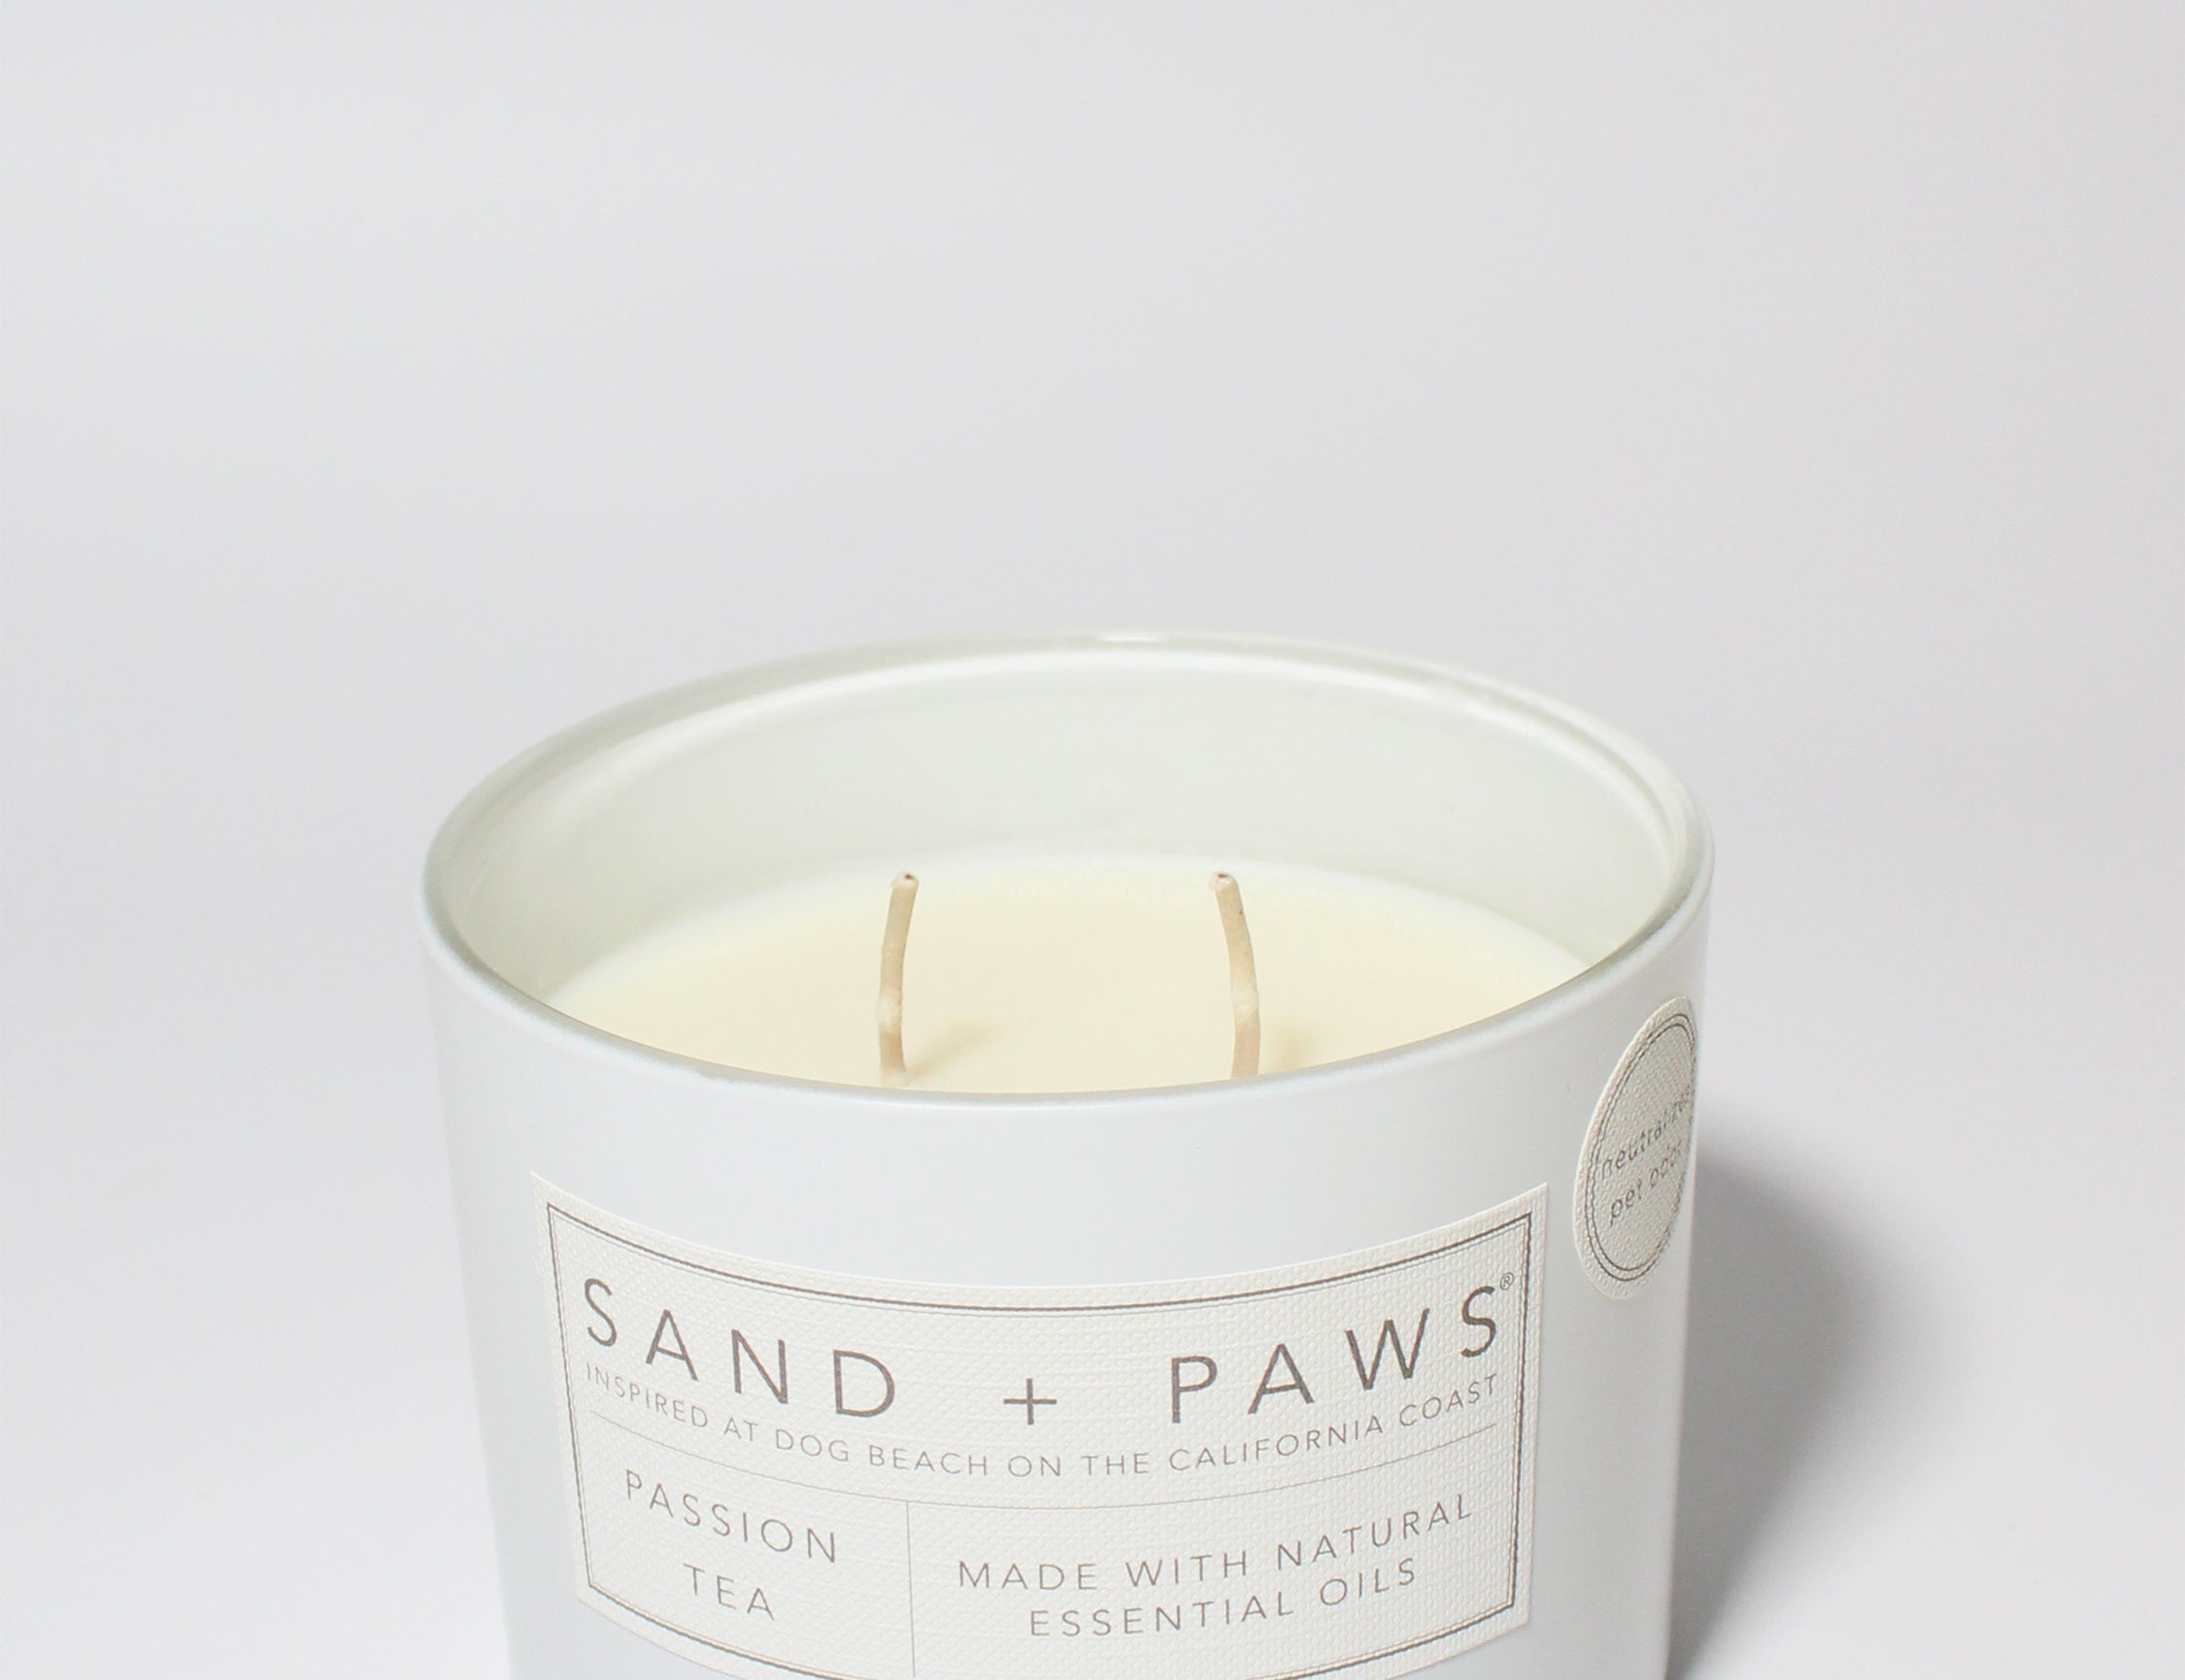 Sand + Paws Passion Tea 12 oz scented candle White vessel with Brown Dog Lid